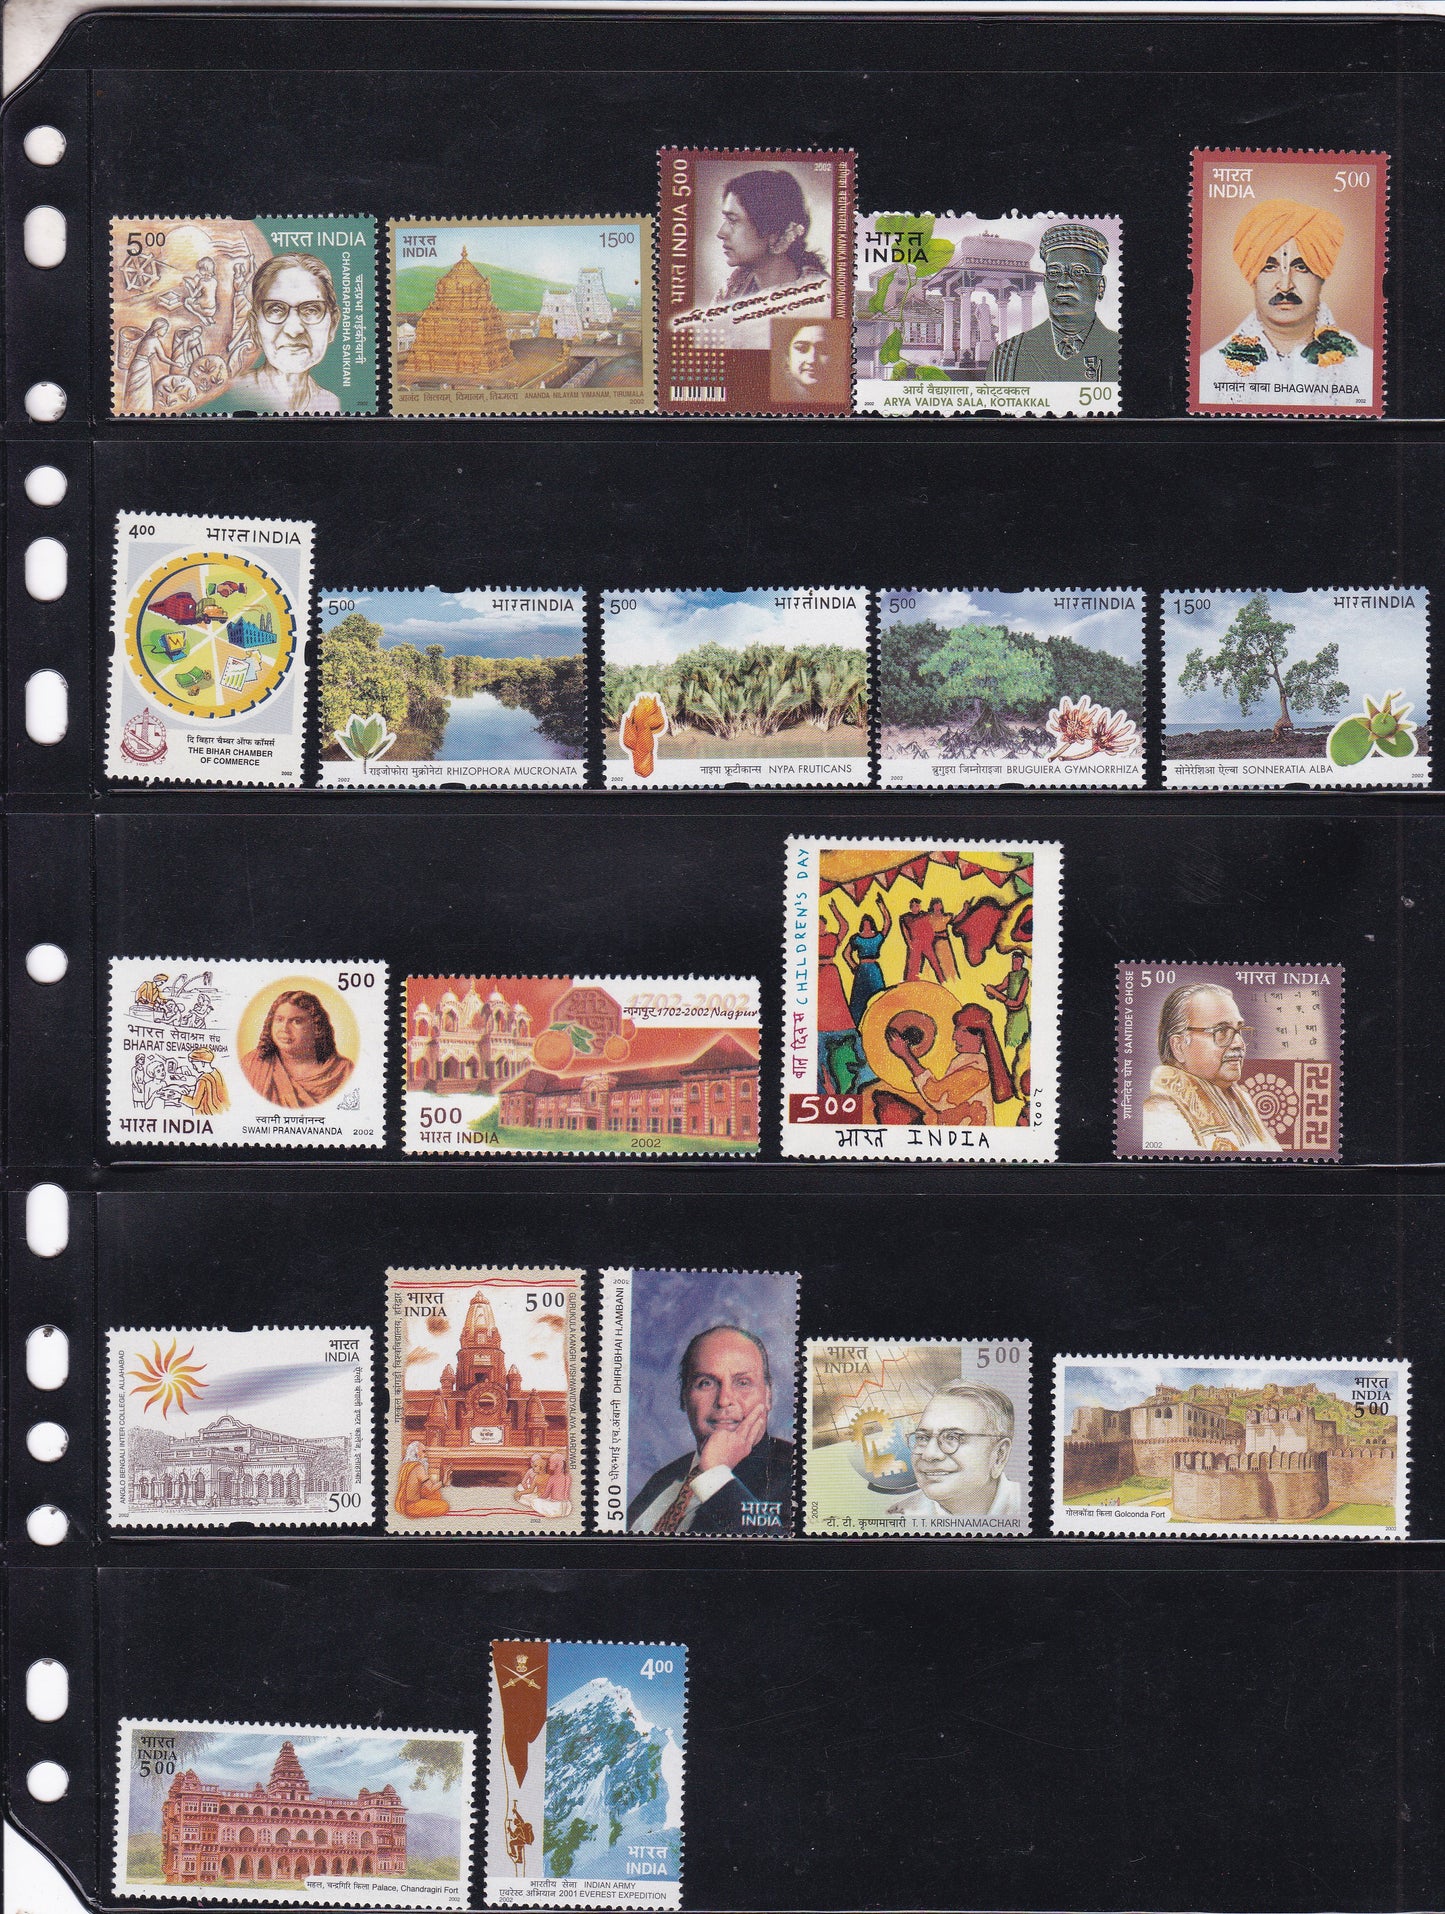 India-2002 Full Year pack MNH Stamps